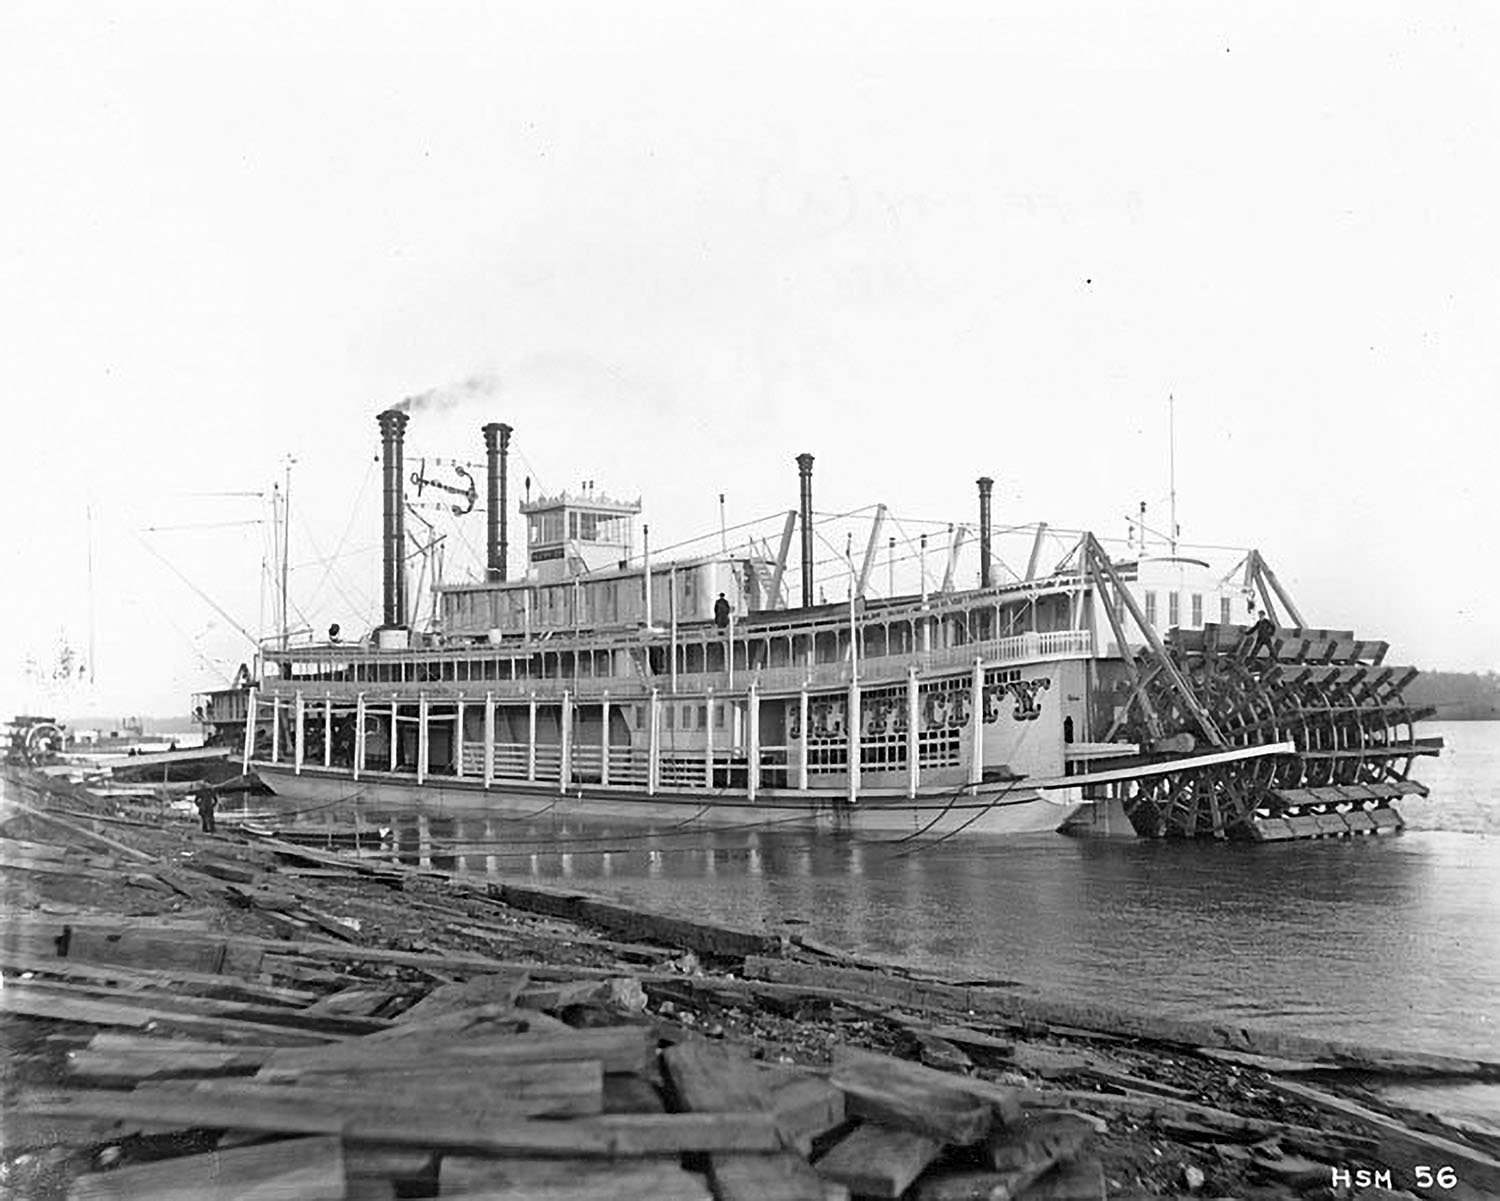 The Anchor Line Steamer Bluff City 